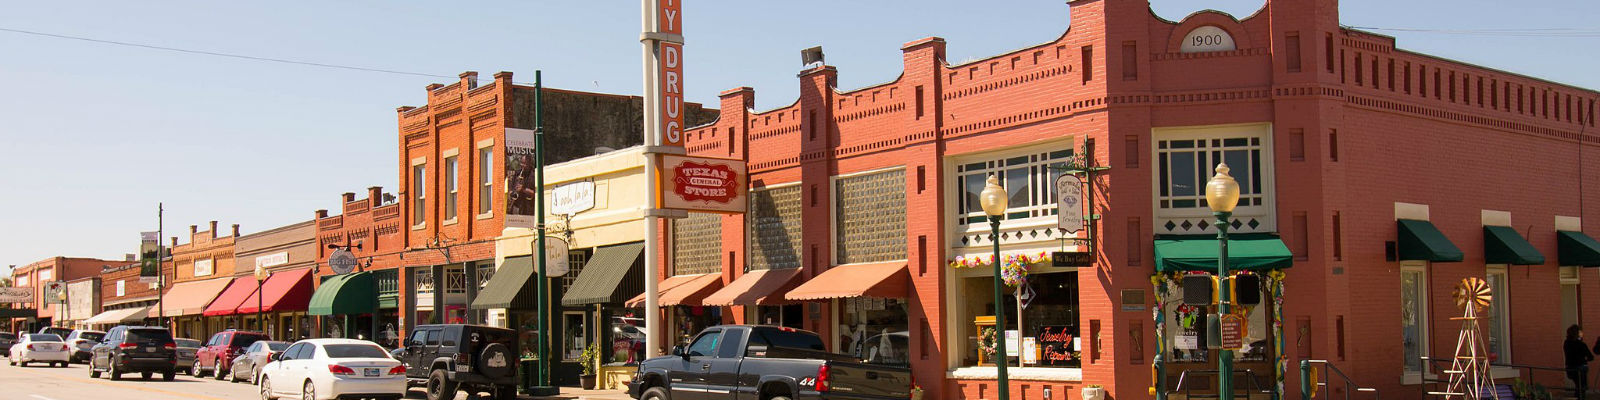 This is an image of downtown Grapevine Texas where ASTA-USA provides professional translation services.